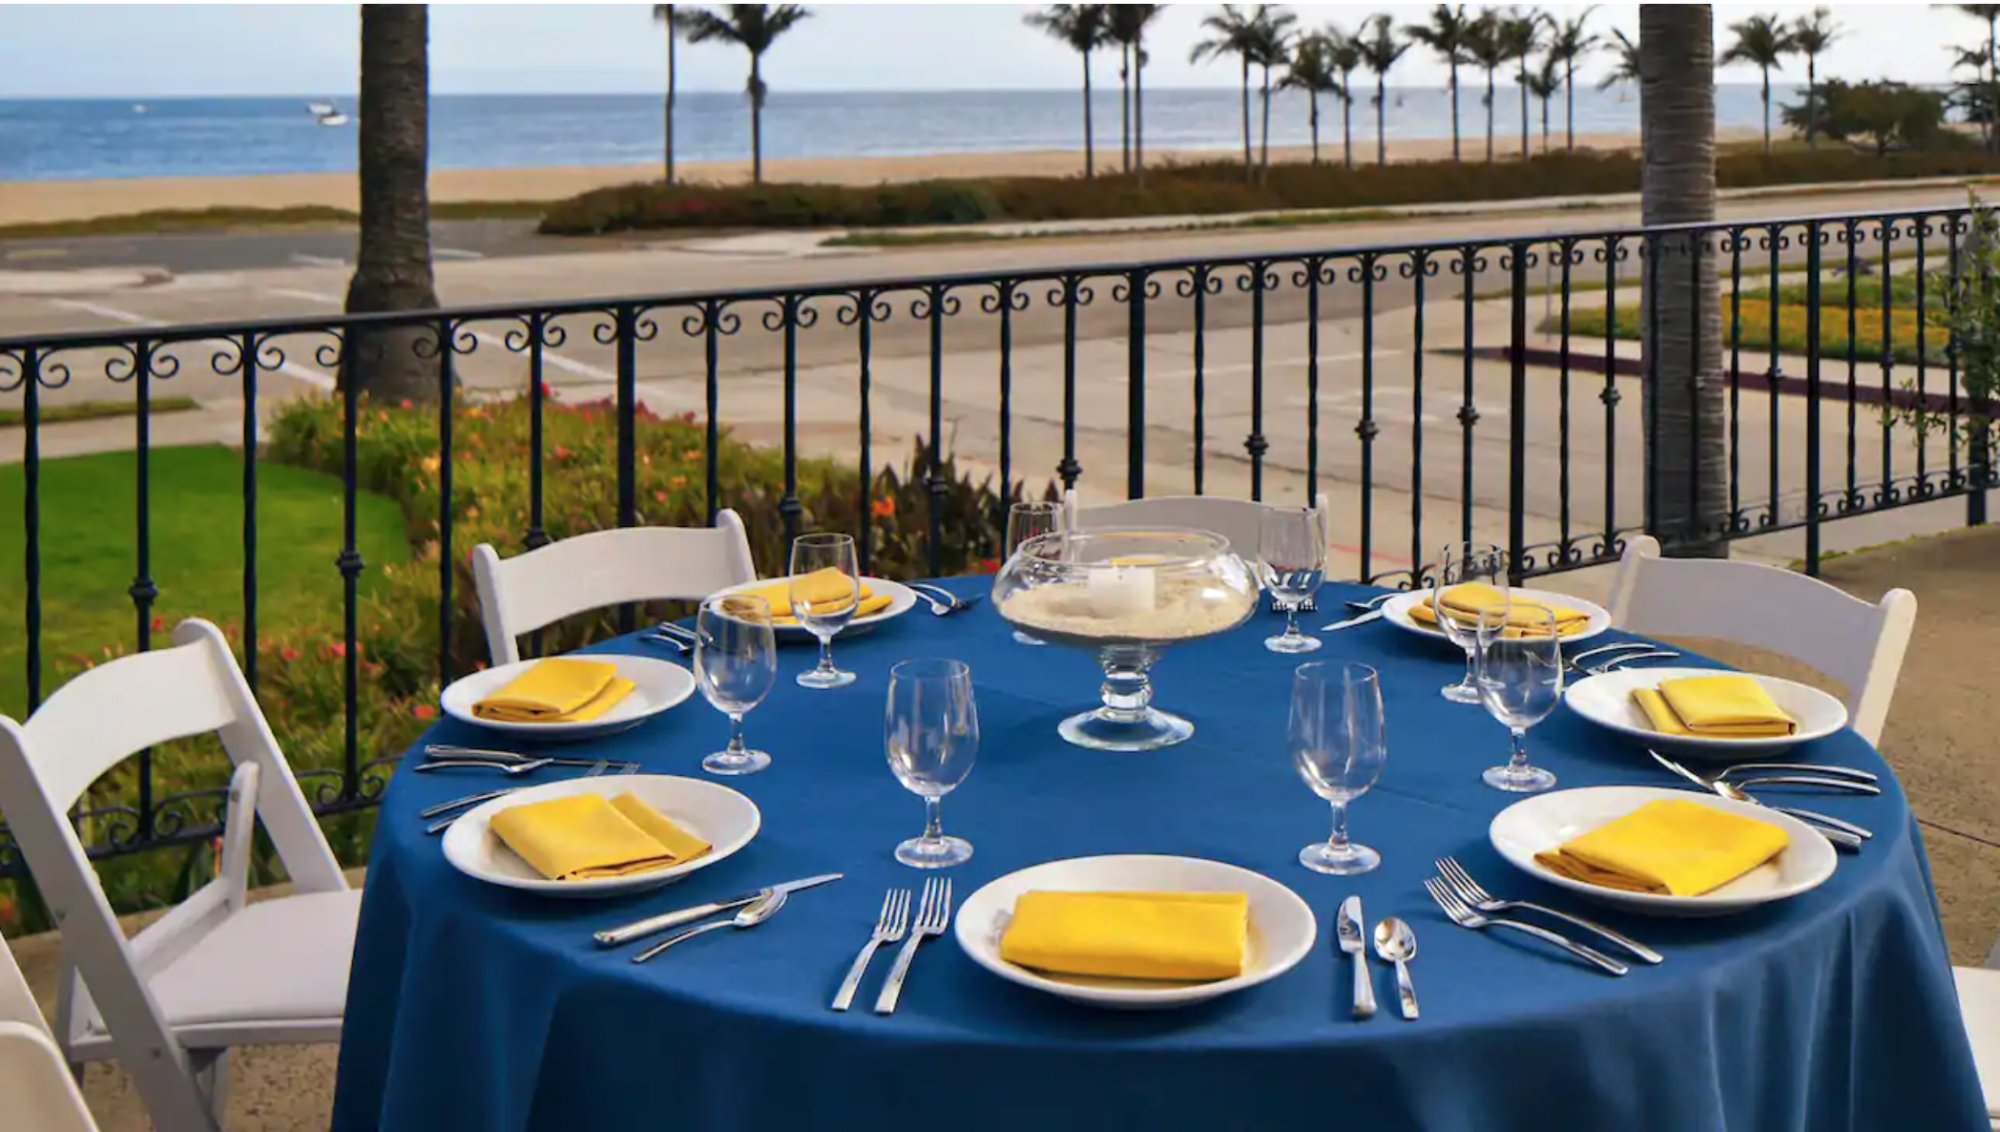 Round table with blue linens, yellow napkins, white plates and glassware overlooking roadway, beach and palm trees at Mar Monte Hotel in Santa Barbara, CA